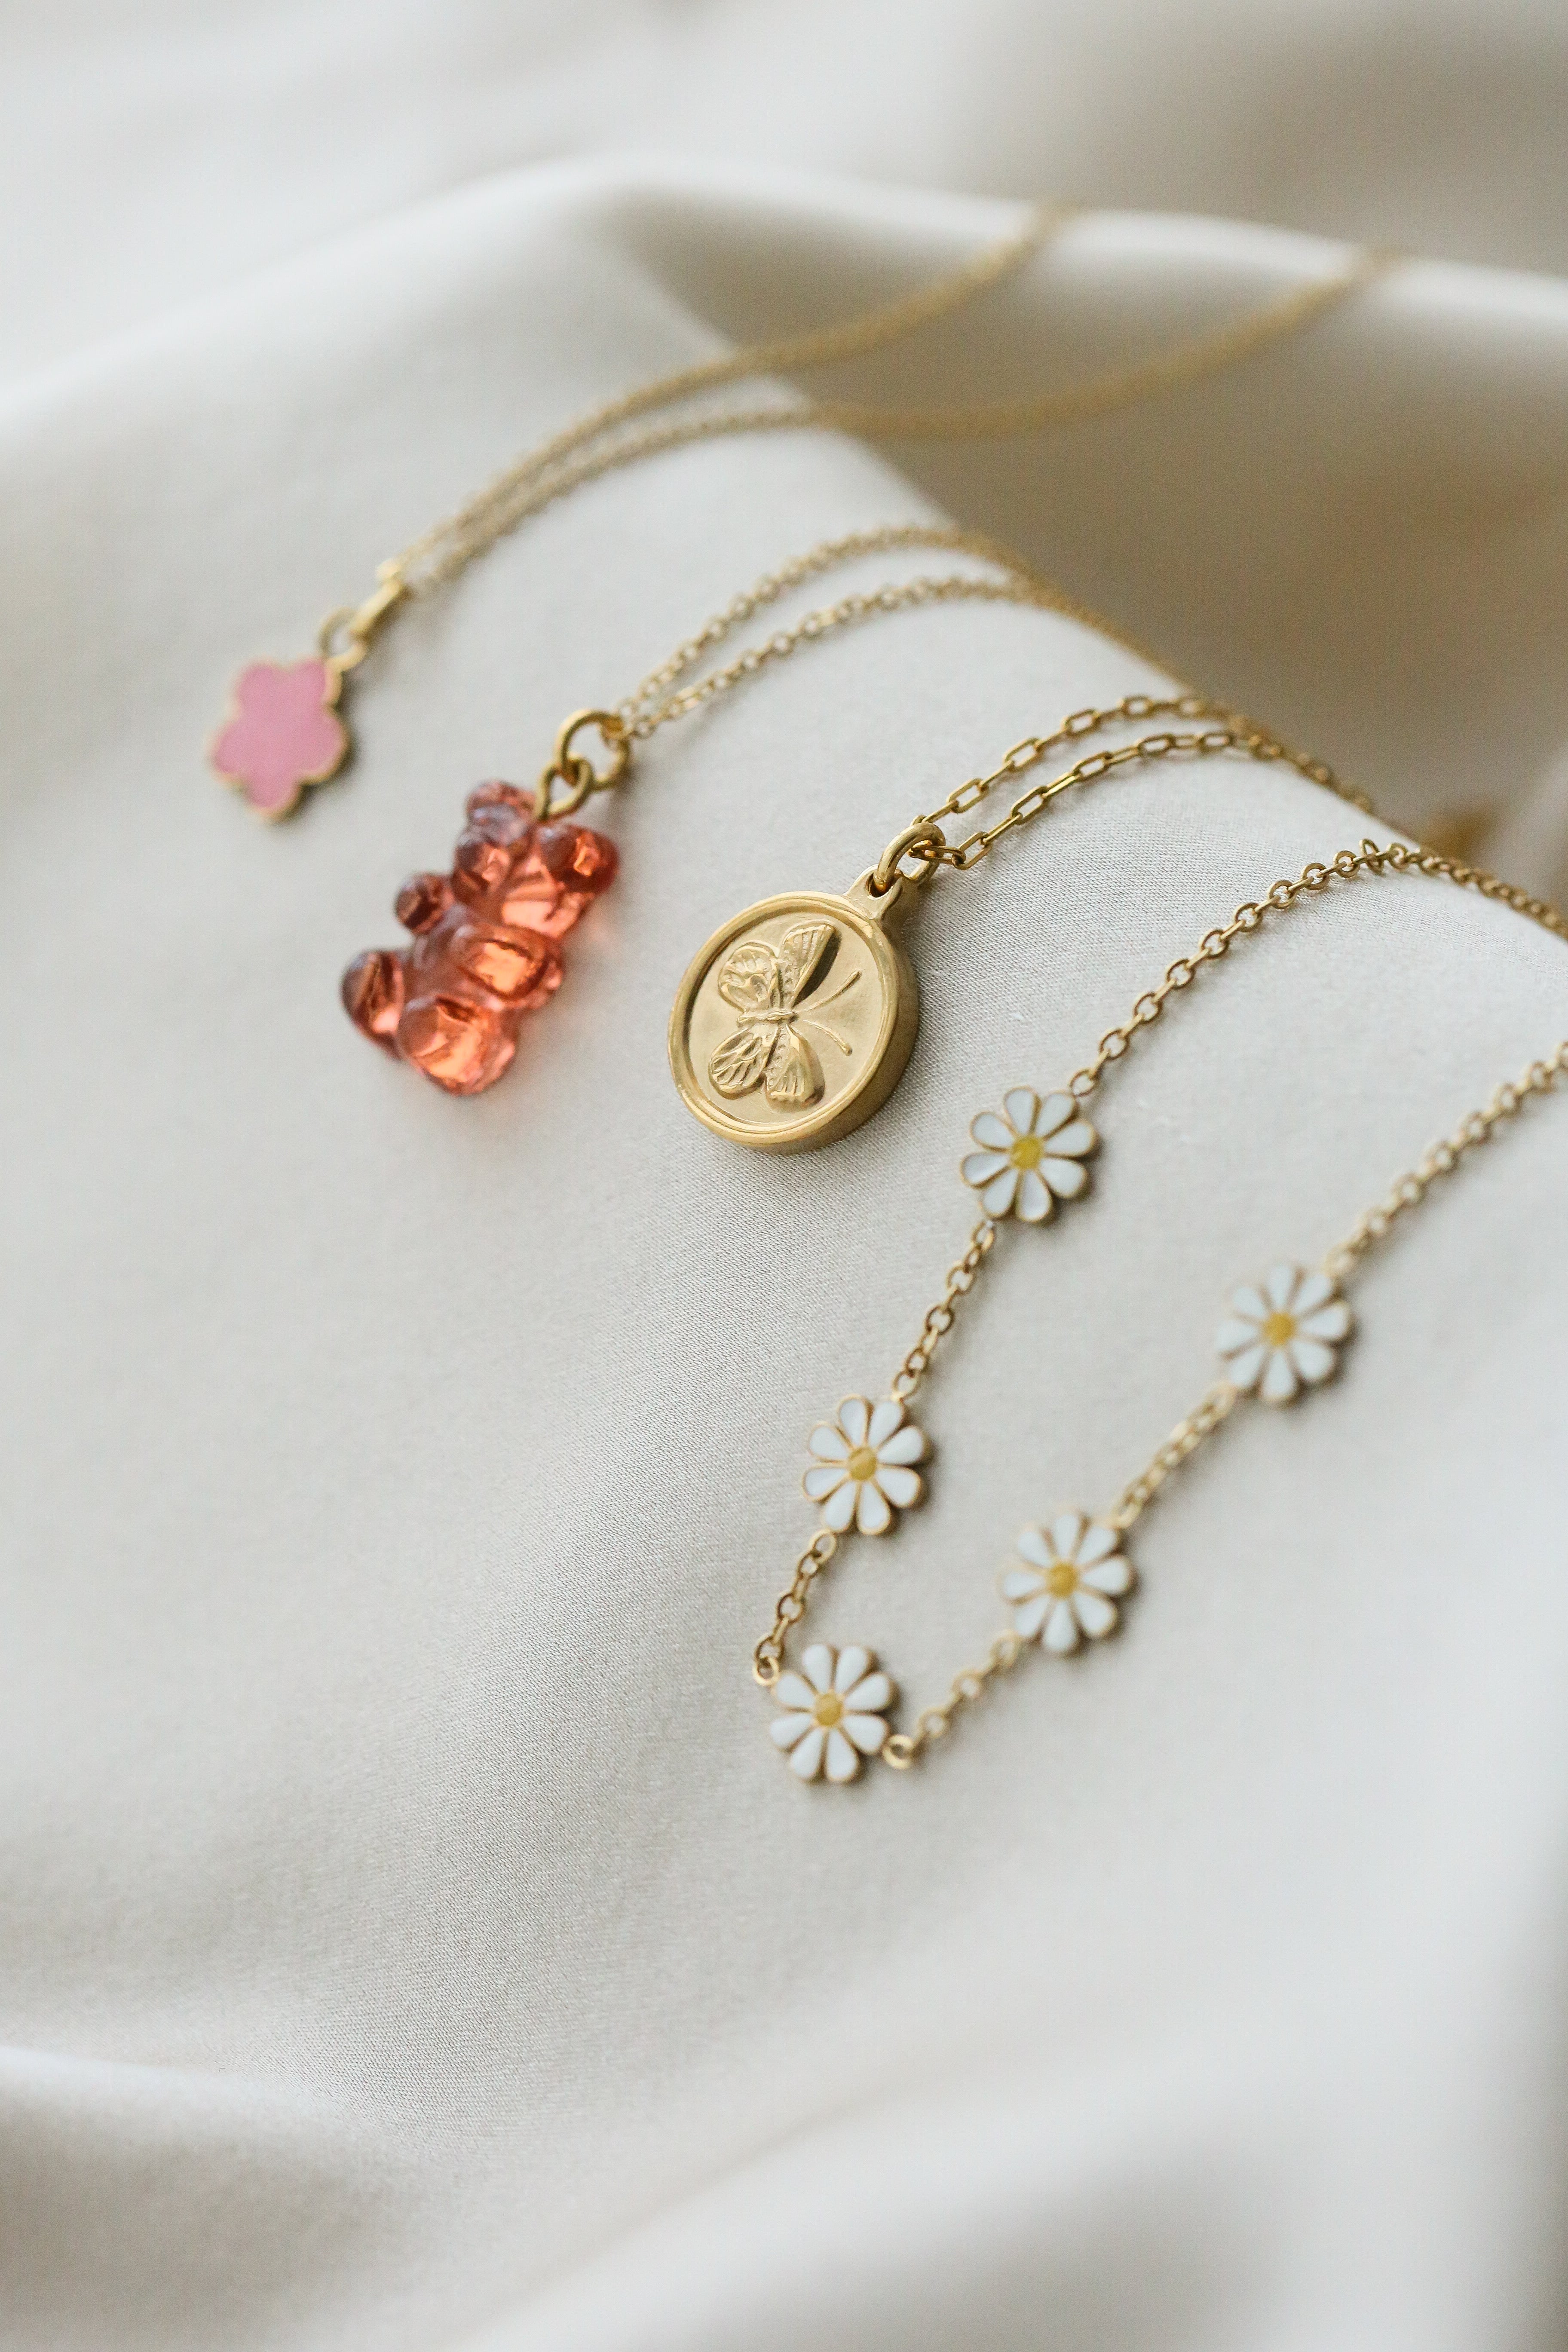 Jewelry Collection for Little Girls - Boutique Minimaliste